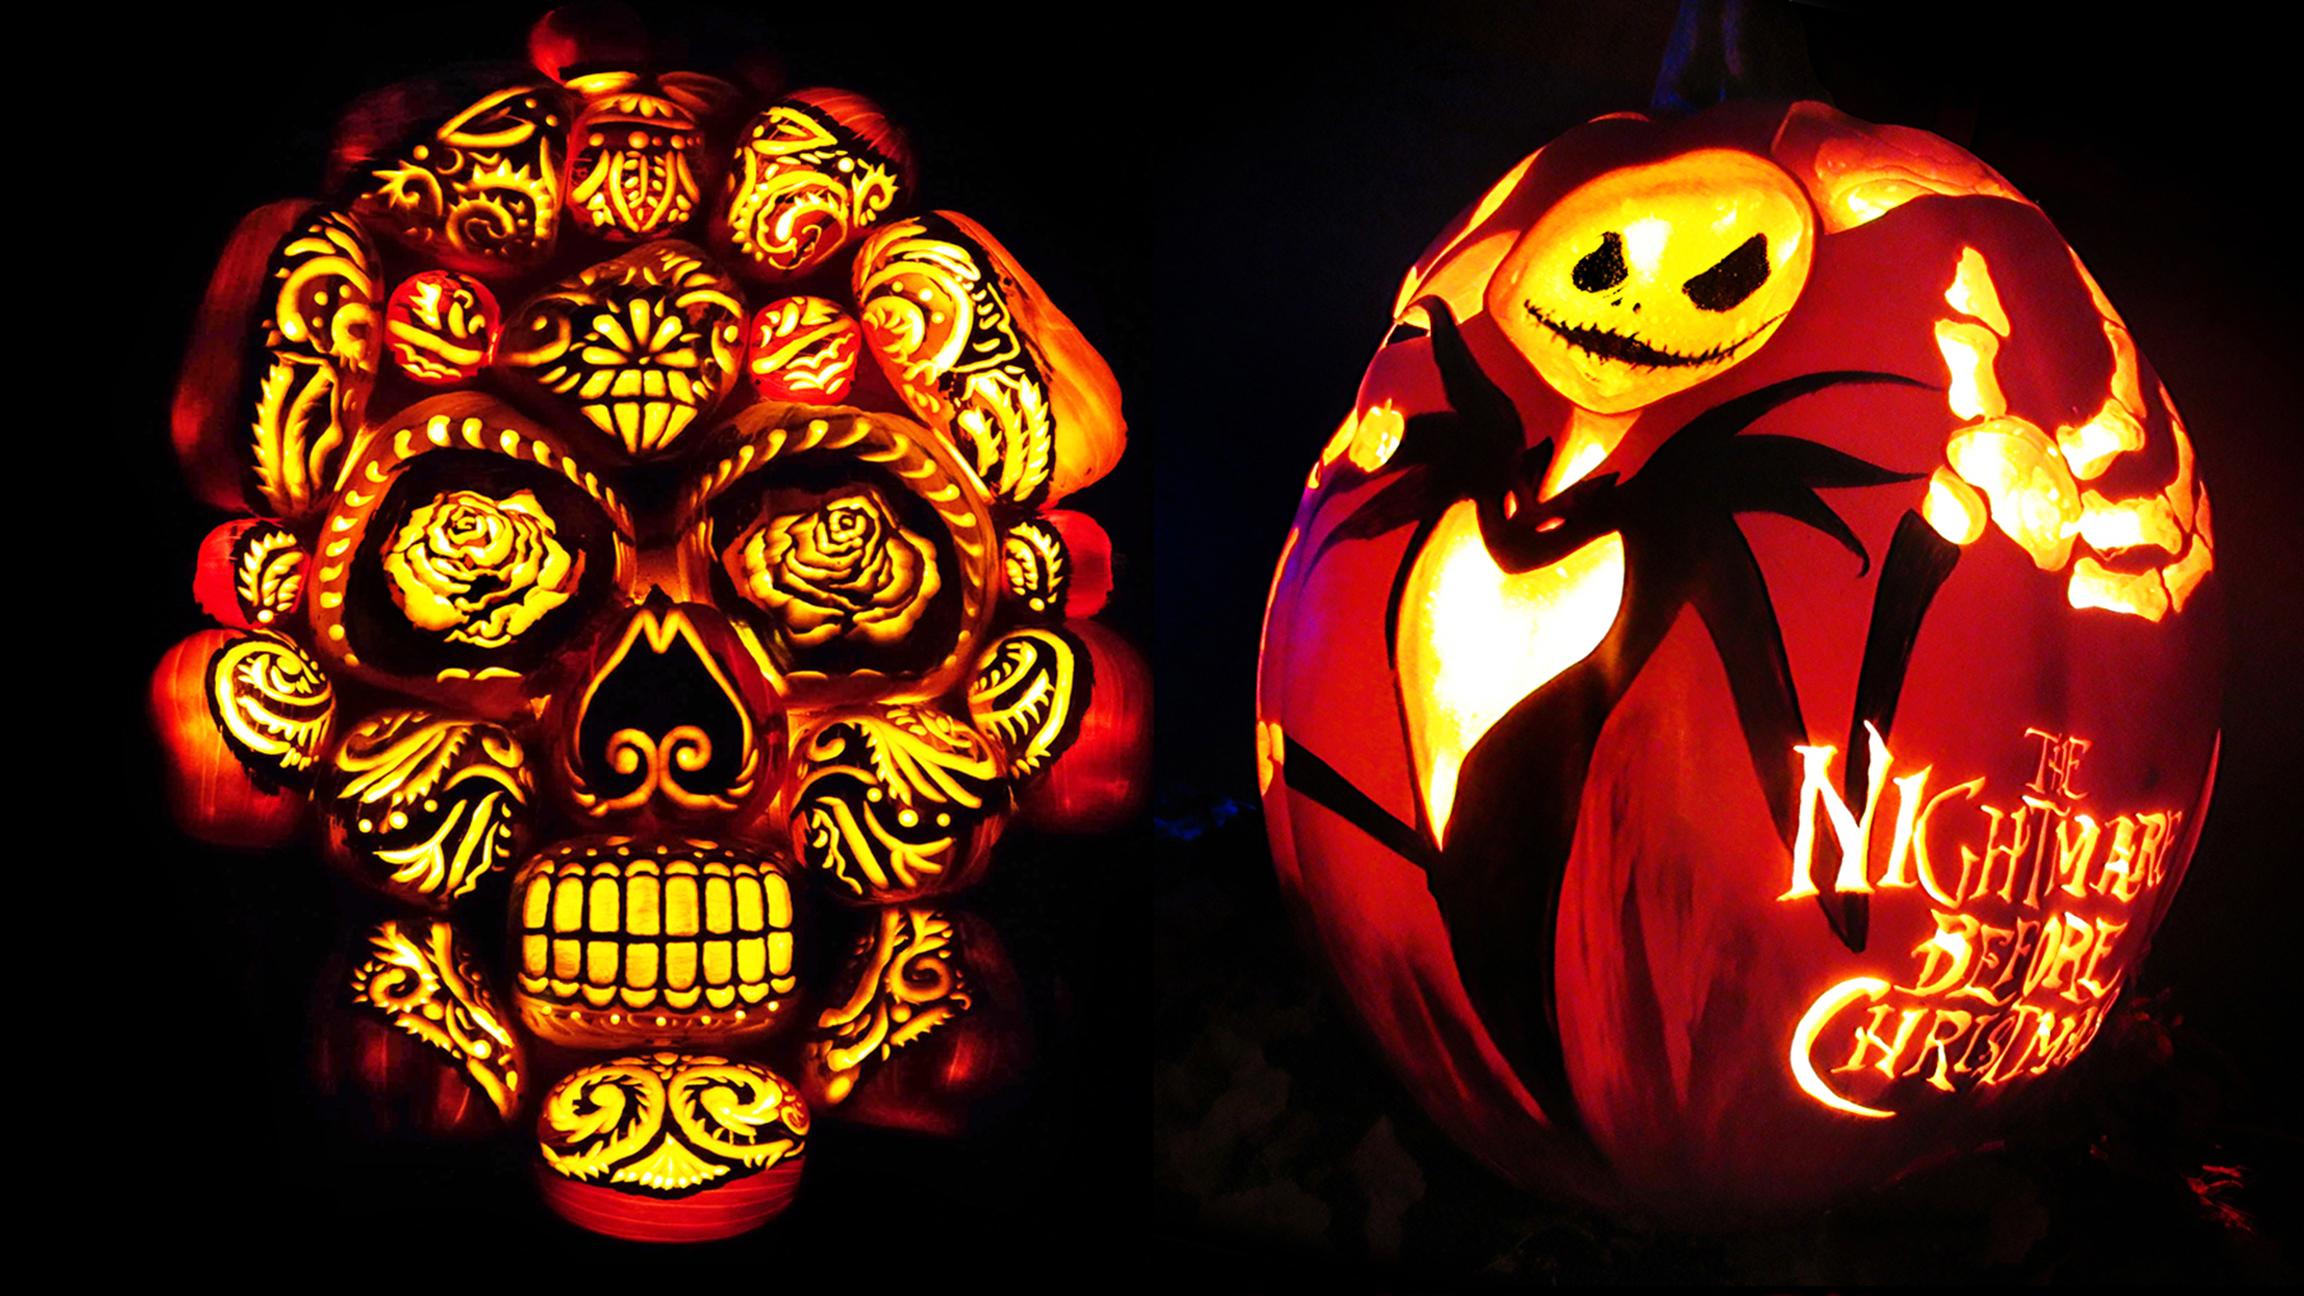 Artists of the New York-based company Rise of the Jack O’Lanterns can spend up to 15 hours on a single gourd. (Courtesy of Rise of the Jack O’Lanterns)